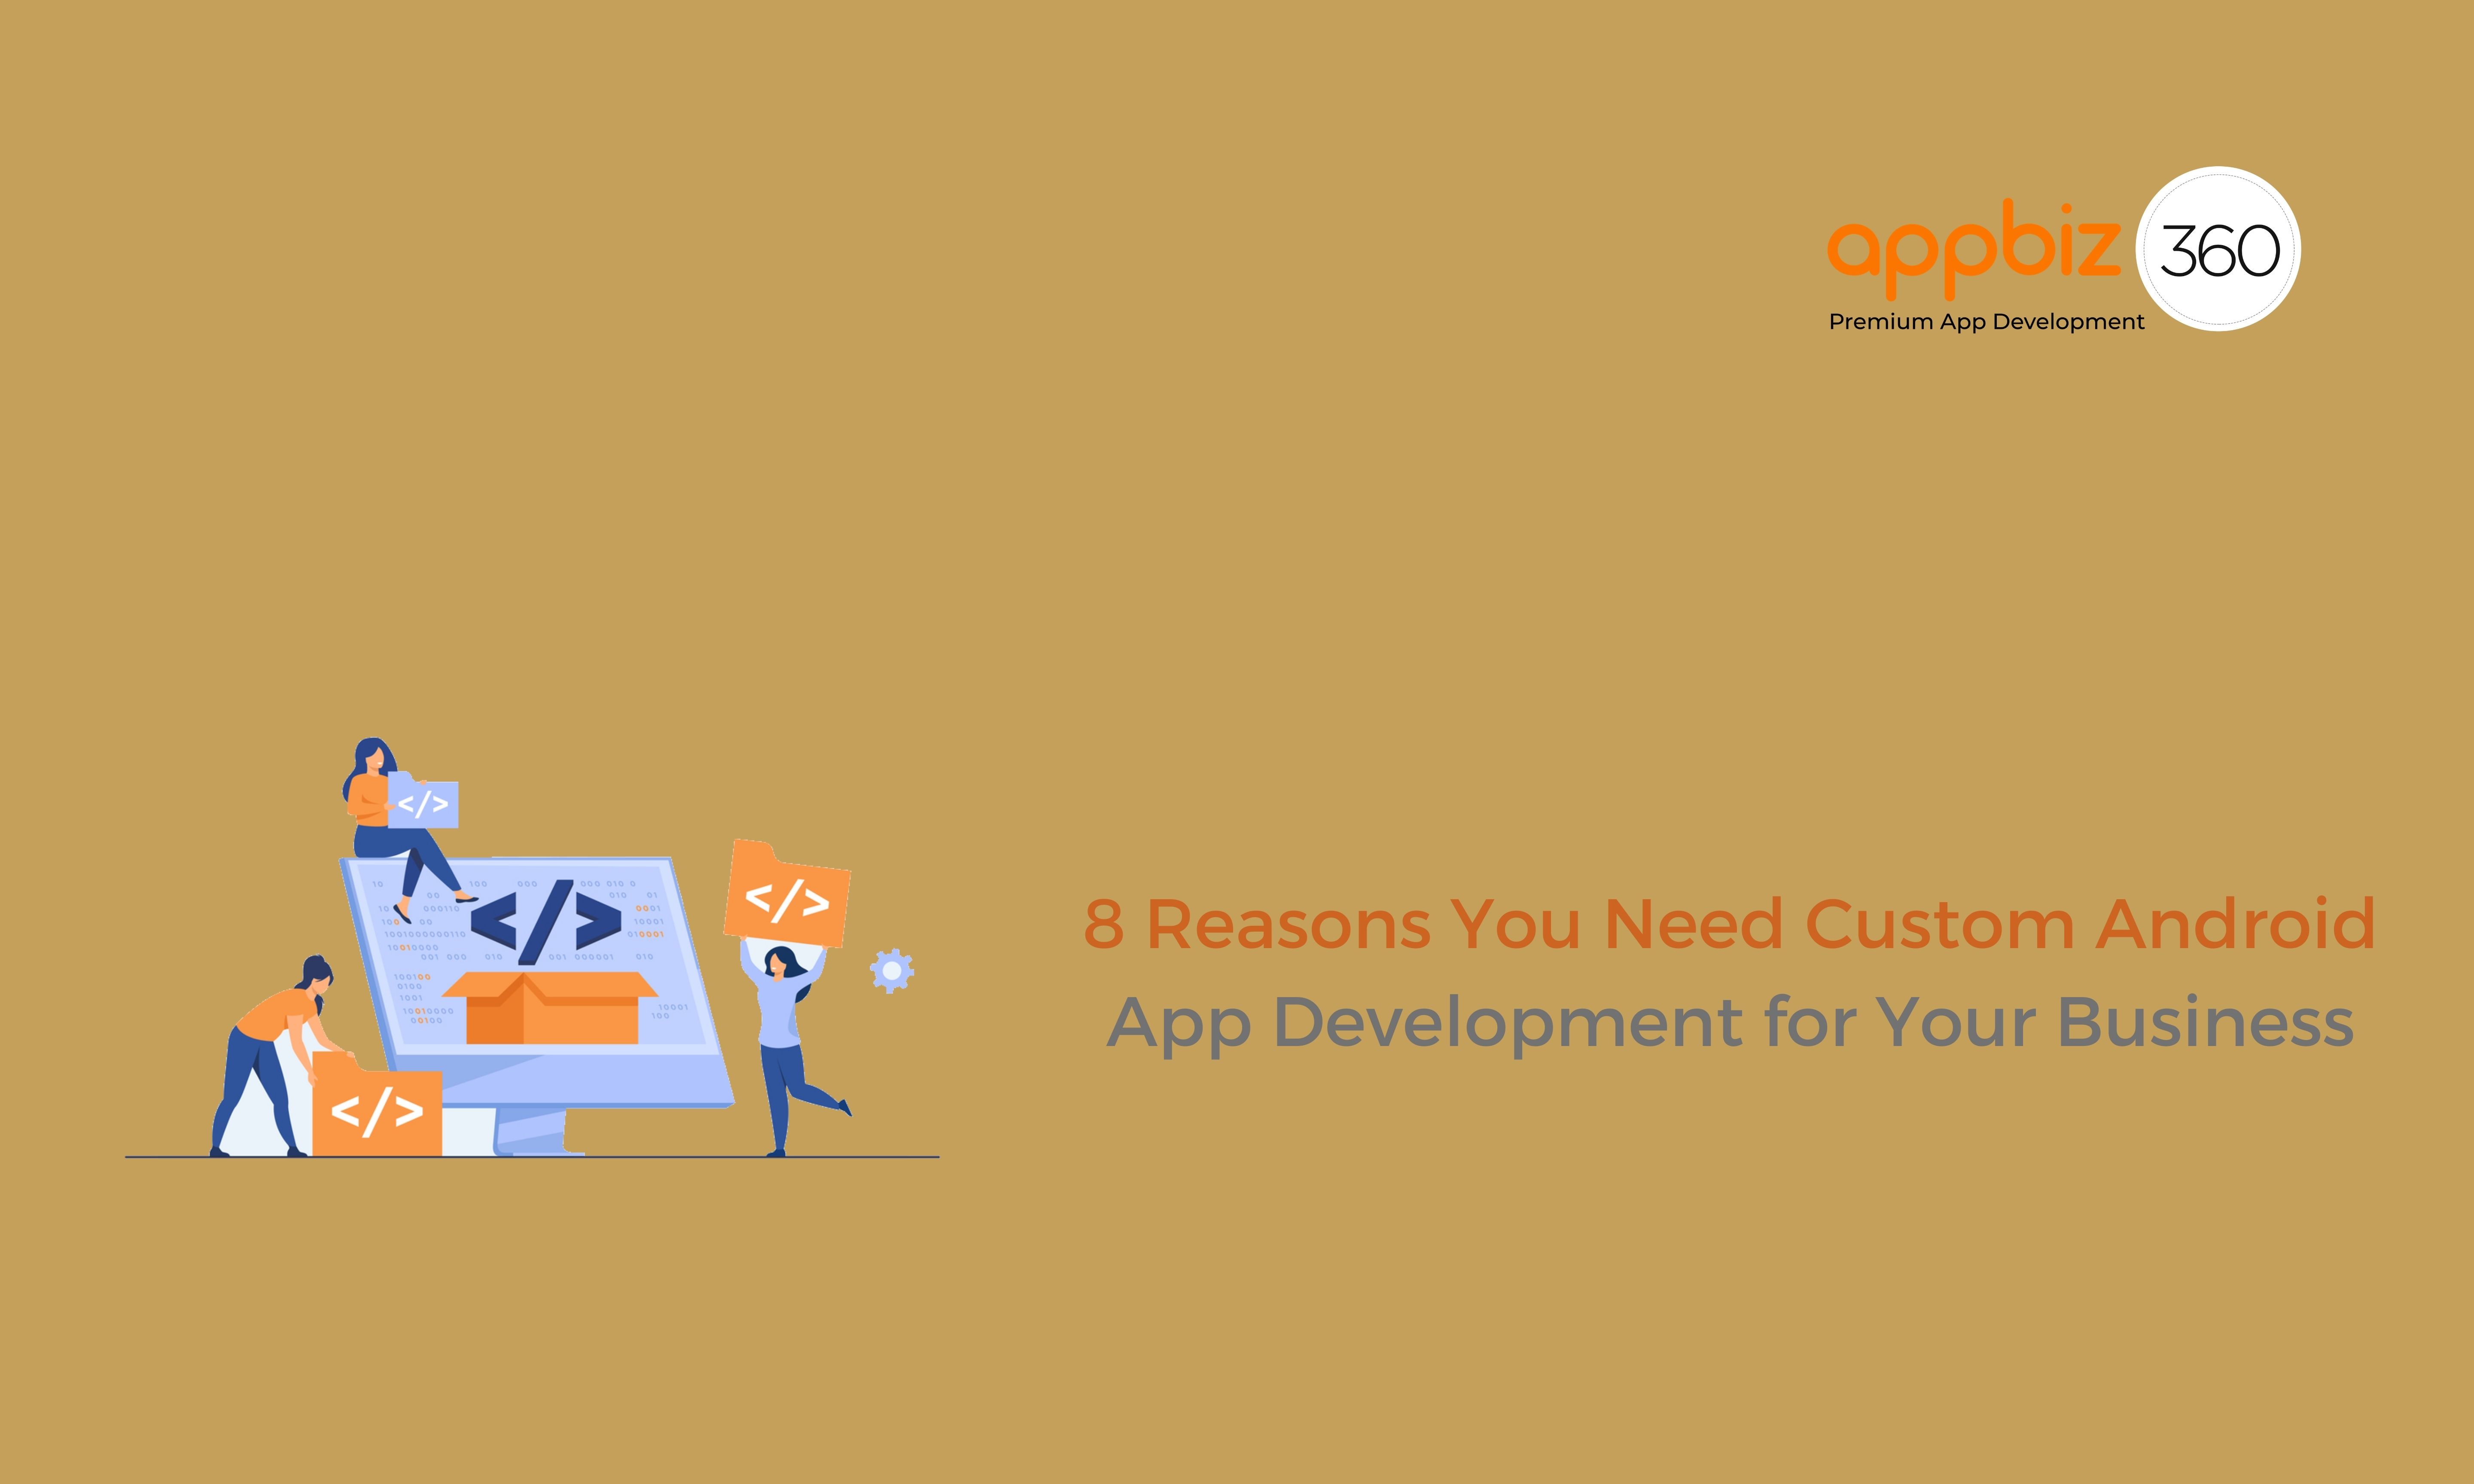 8 Reasons You Need Custom Android App Development for Your Business